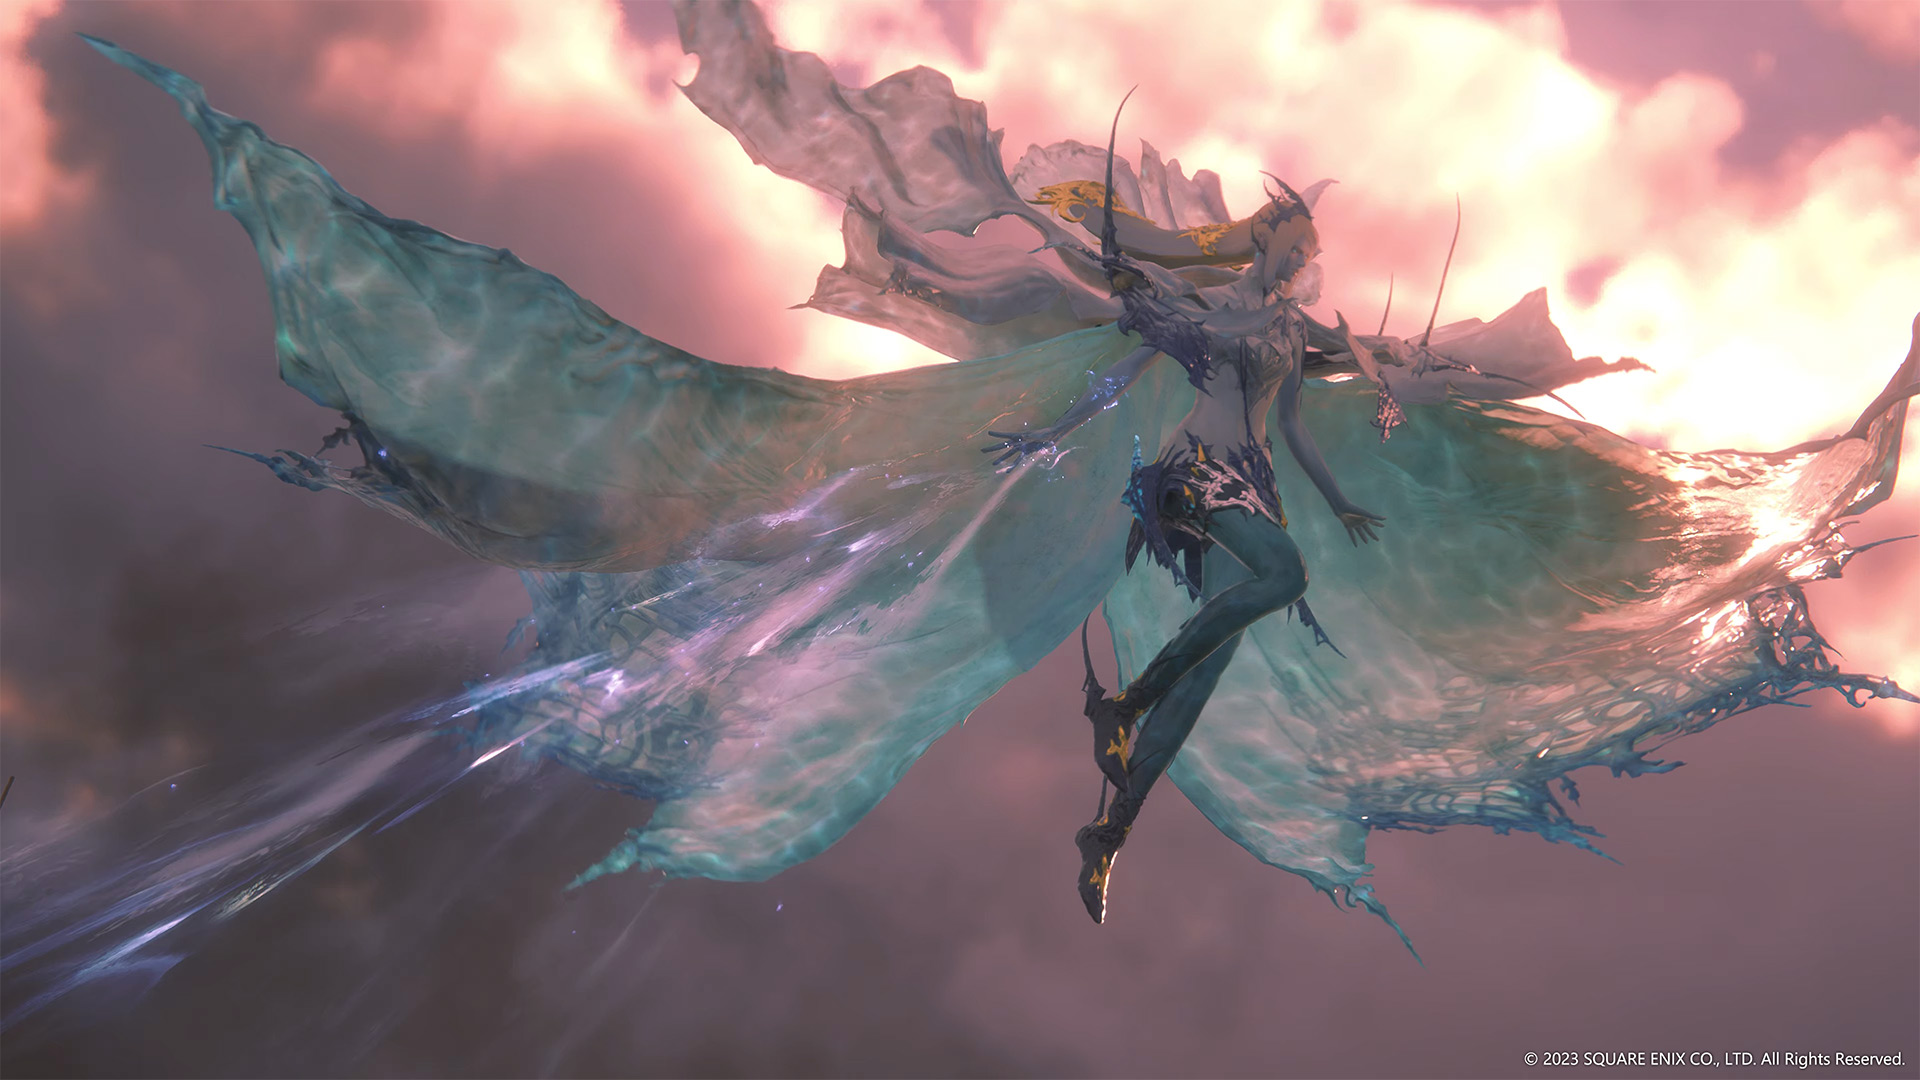 Square Enix has released six new videos for Final Fantasy XVI